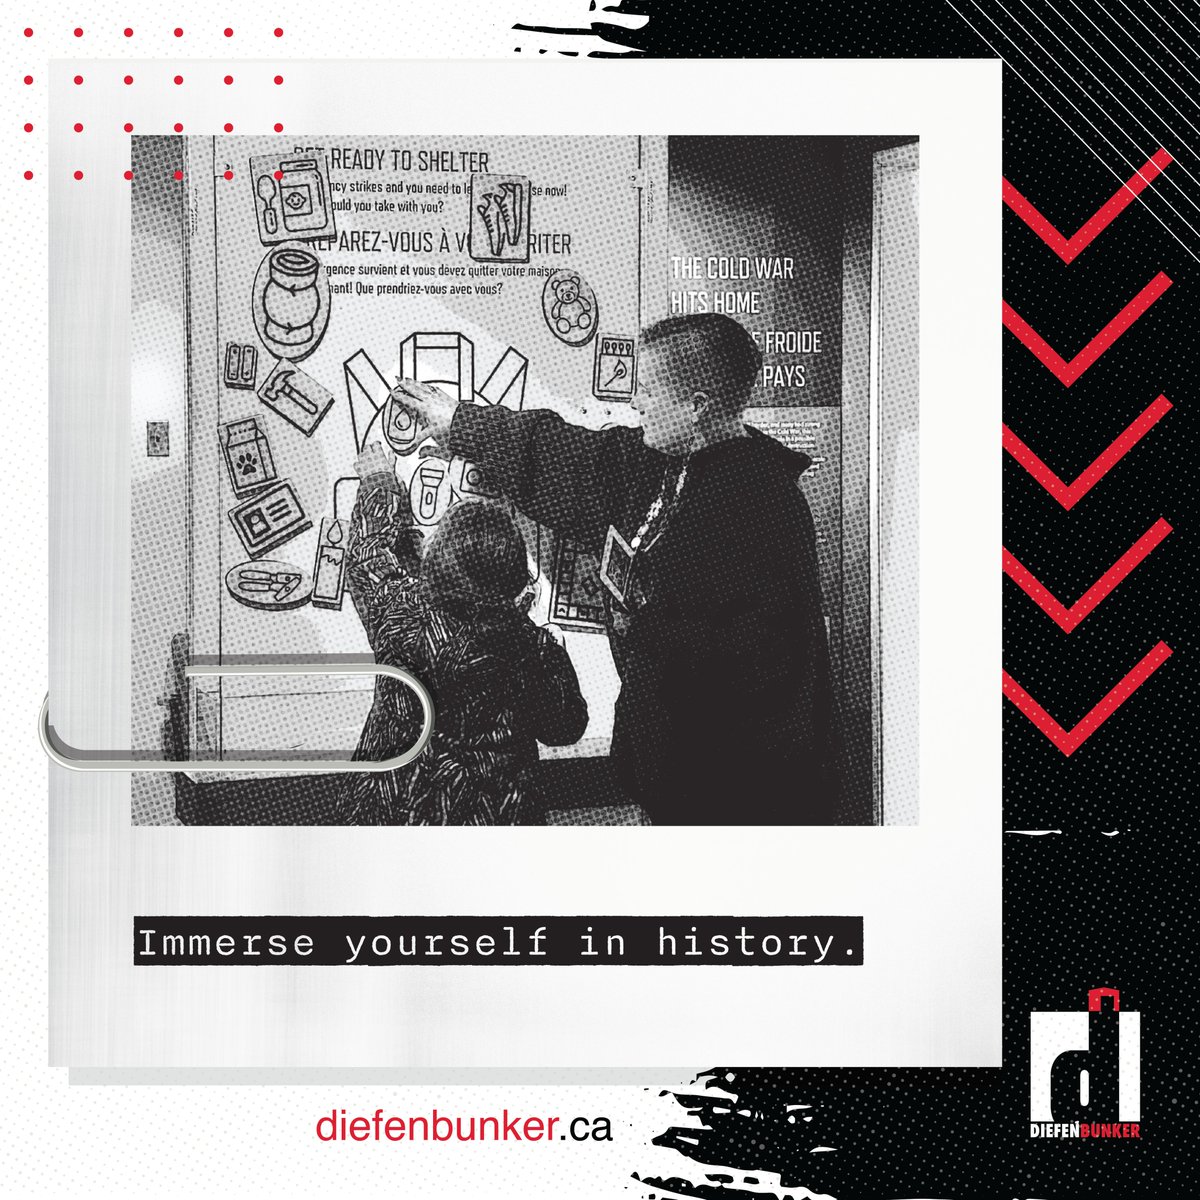 Immerse yourself in history. The Diefenbunker is a hands-on experience: sit on the chairs, enter the vault and experience Canada’s Cold War history. Located 35 km west of Ottawa in the community of Carp – out of sight but top of mind. Book tickets: diefenbunker.ca/tours